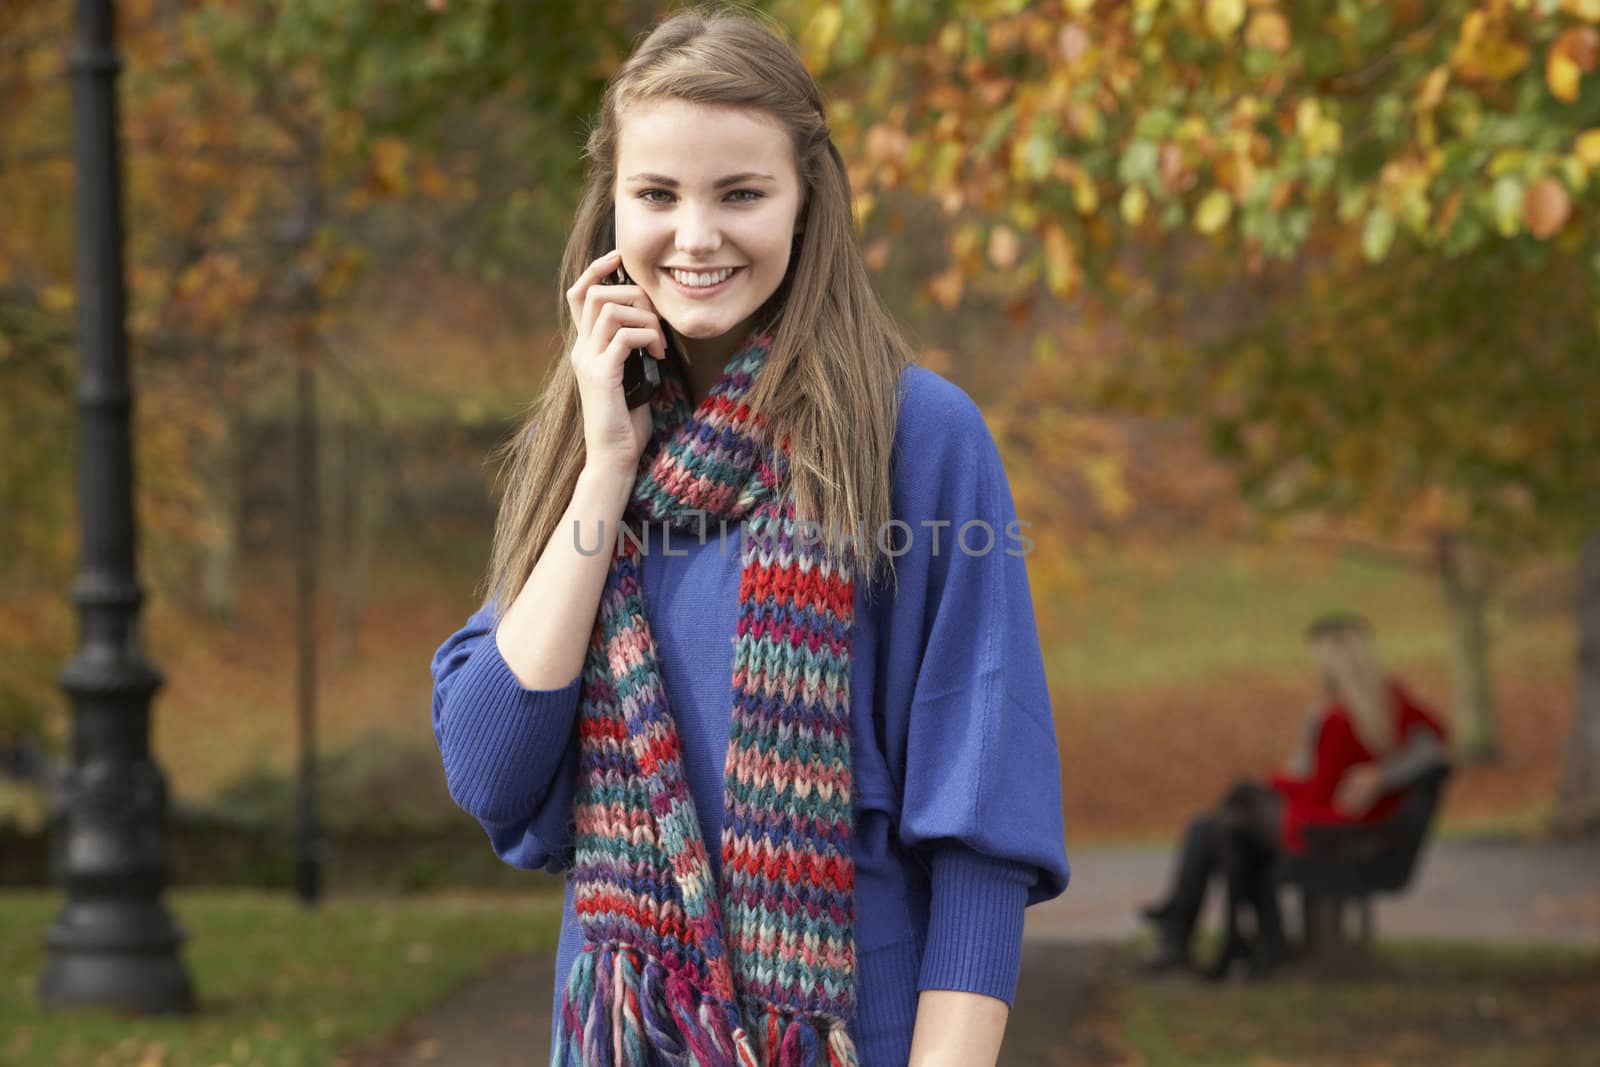 Teenage Girl On Mobile Phone In Autumn Park With Couple On Bench by omg_images